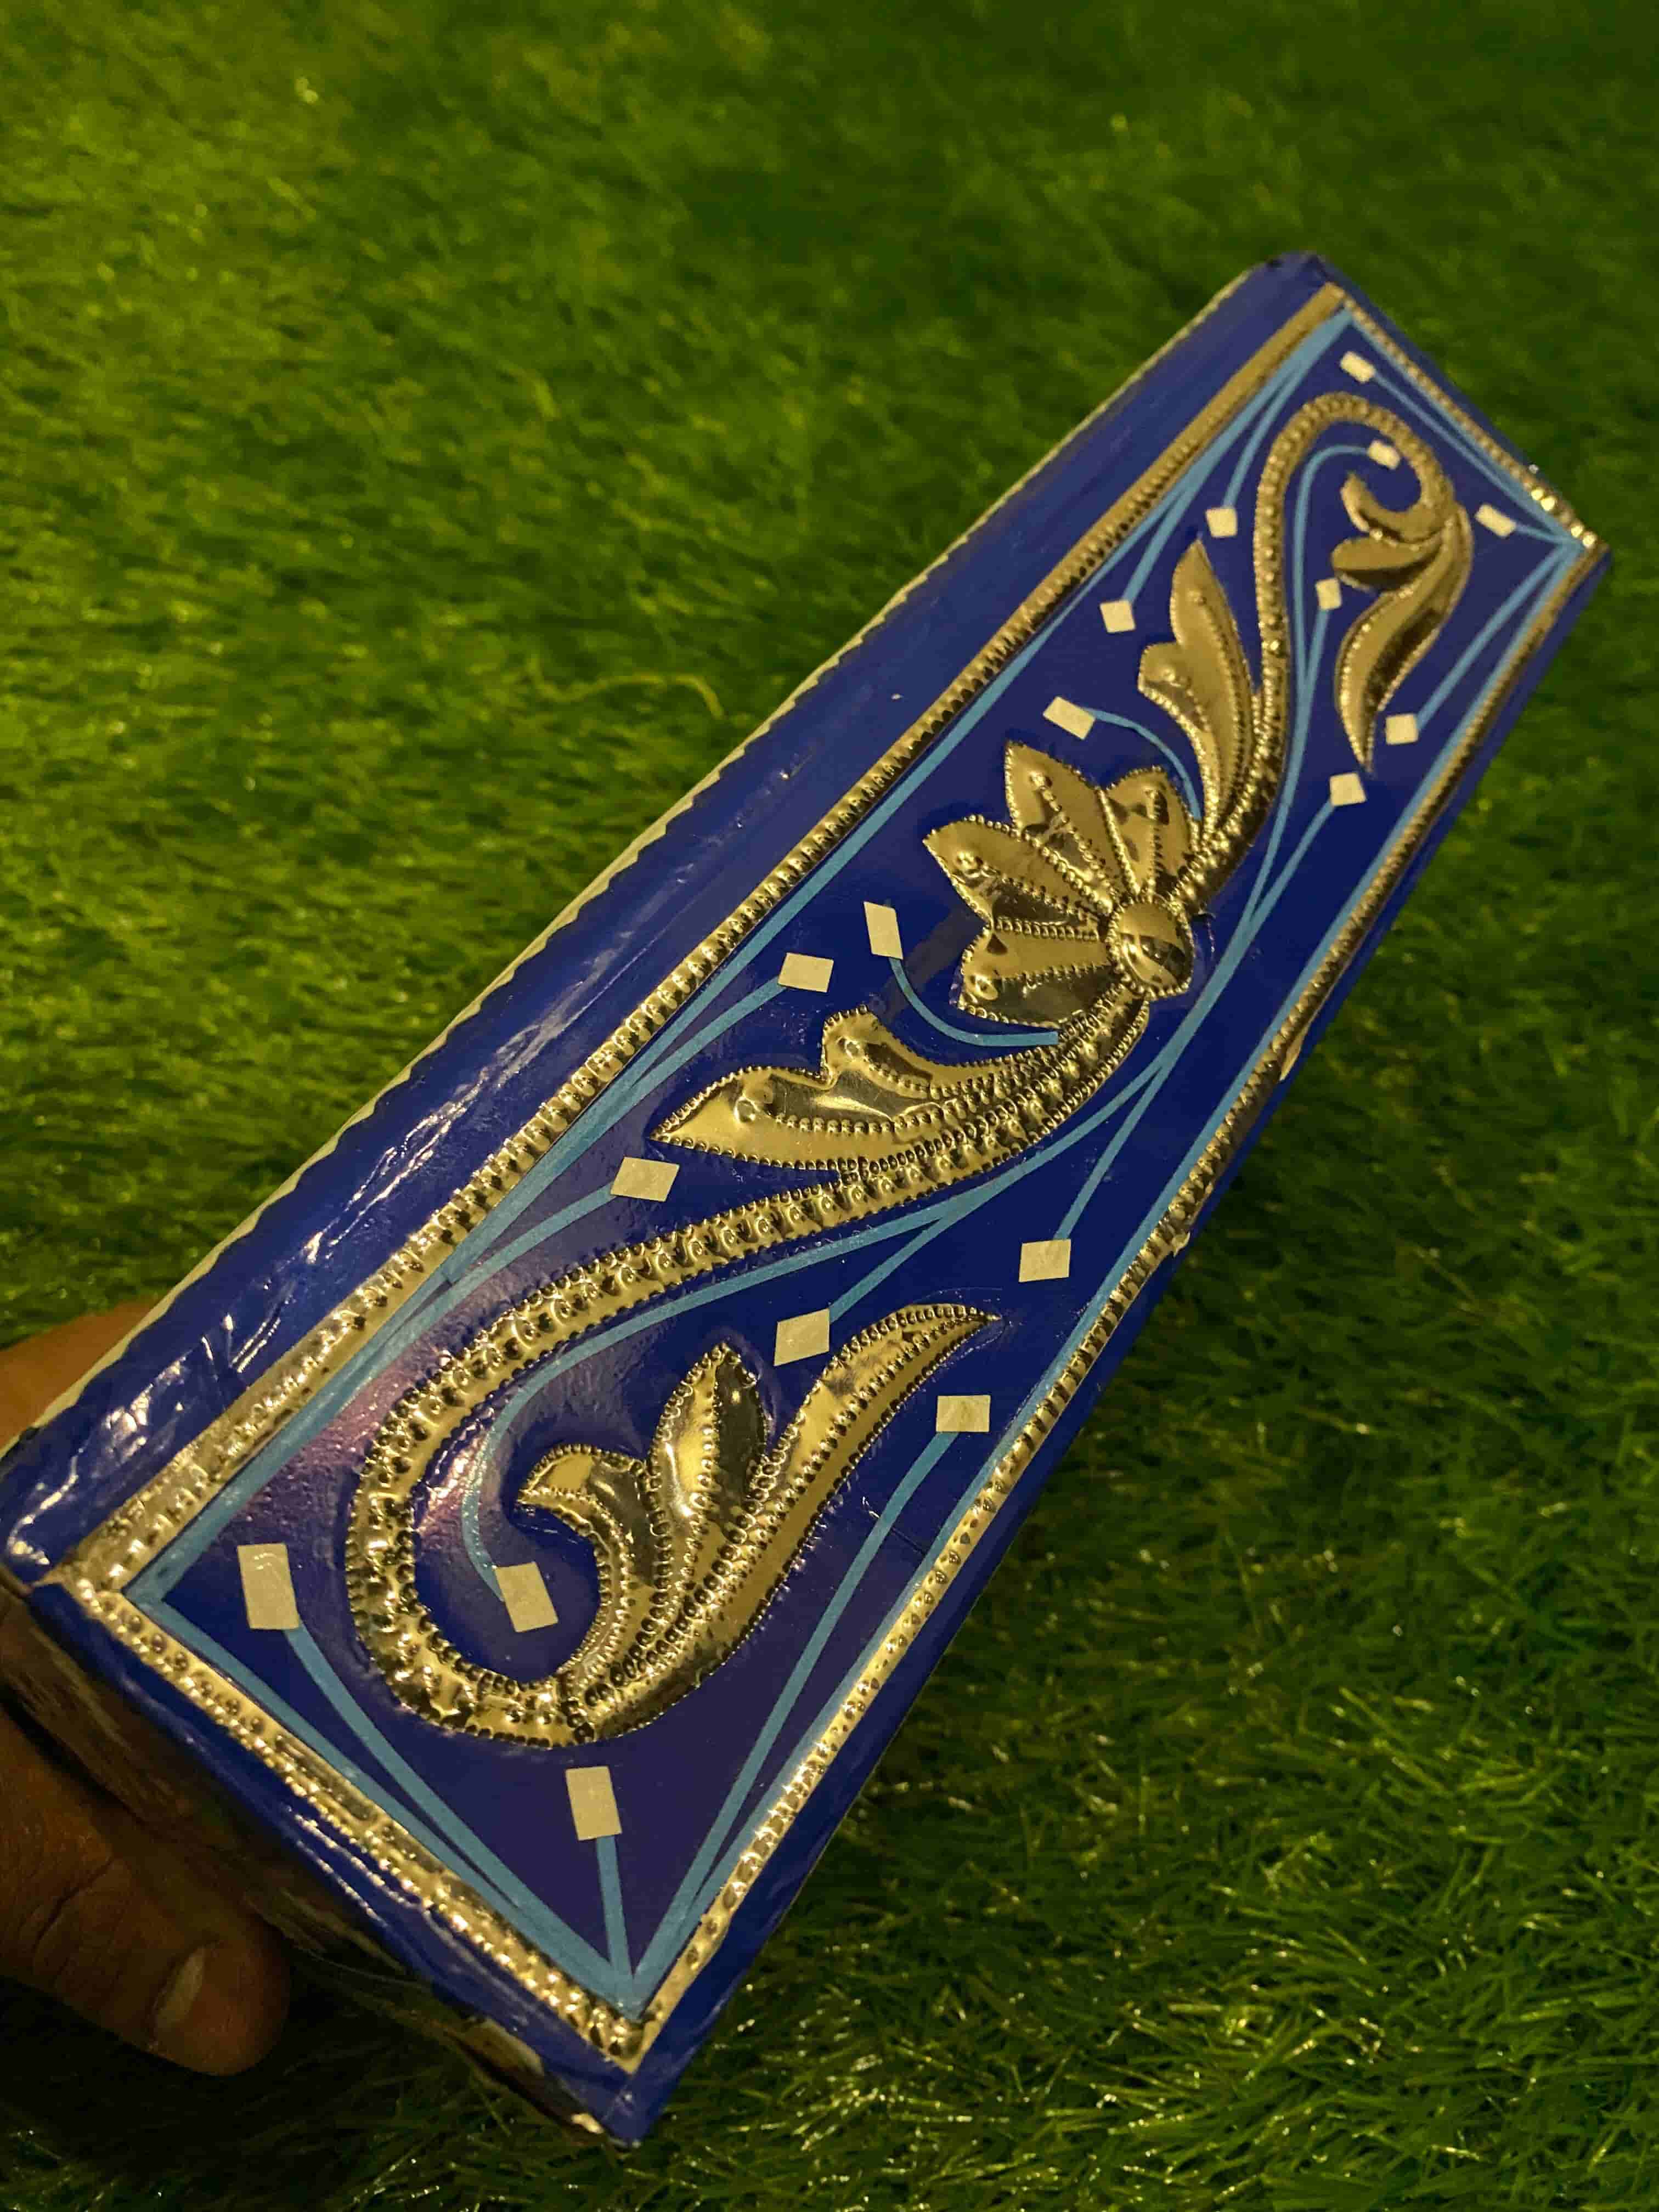 handcrafted-chamakpatti-tissue-box-in-royal-blue-naksh-decor-home-decor-tissue-boxes-truck-art-2